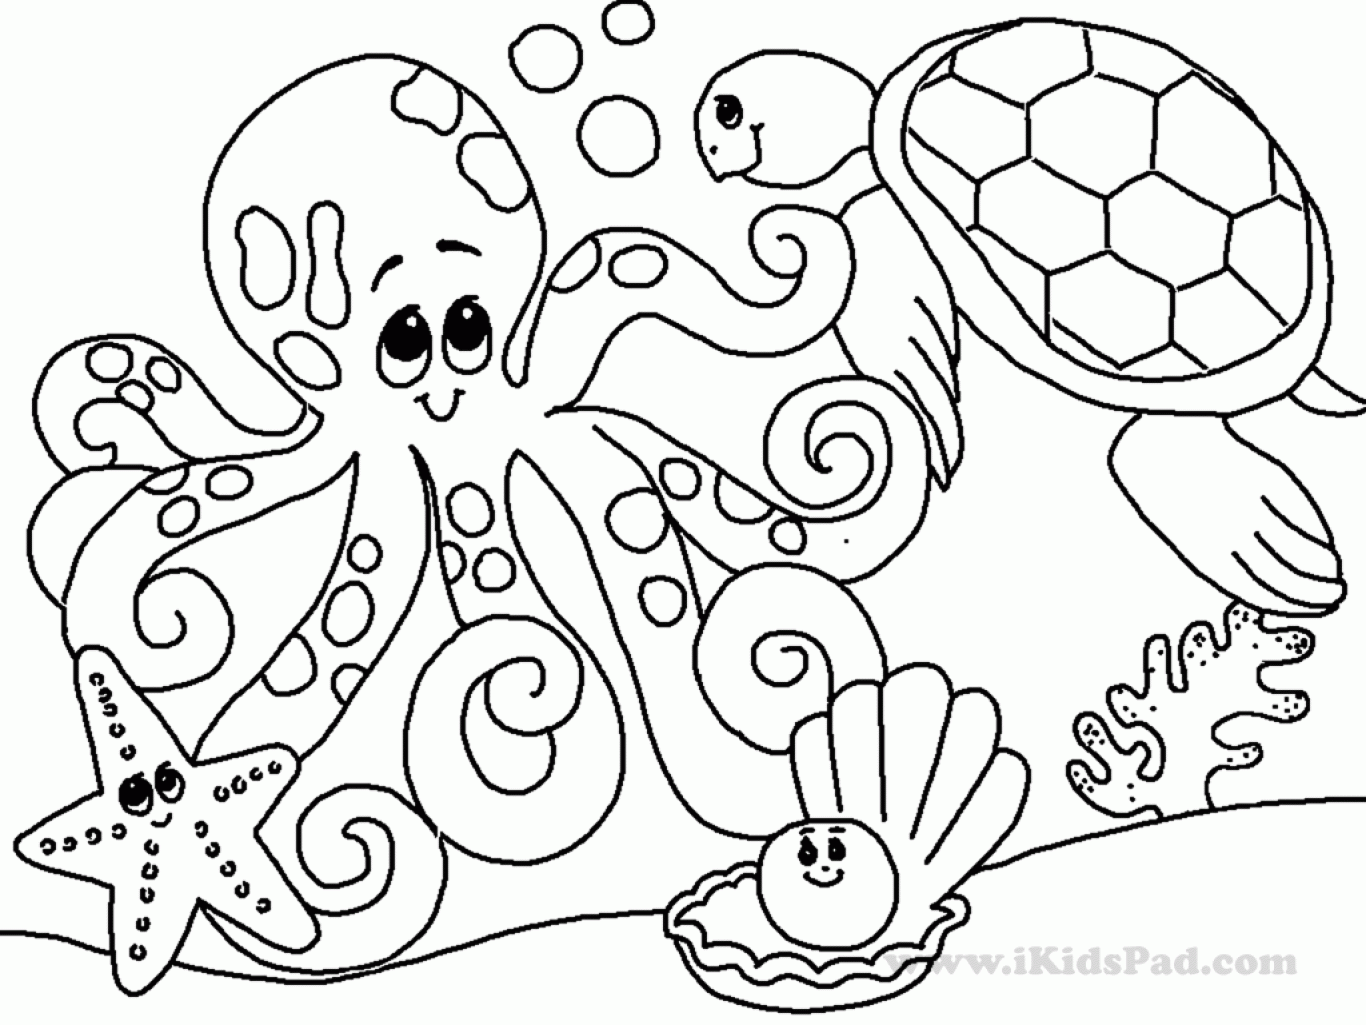 Coloring Book Pages Animals - Coloring Pages for Kids and for Adults